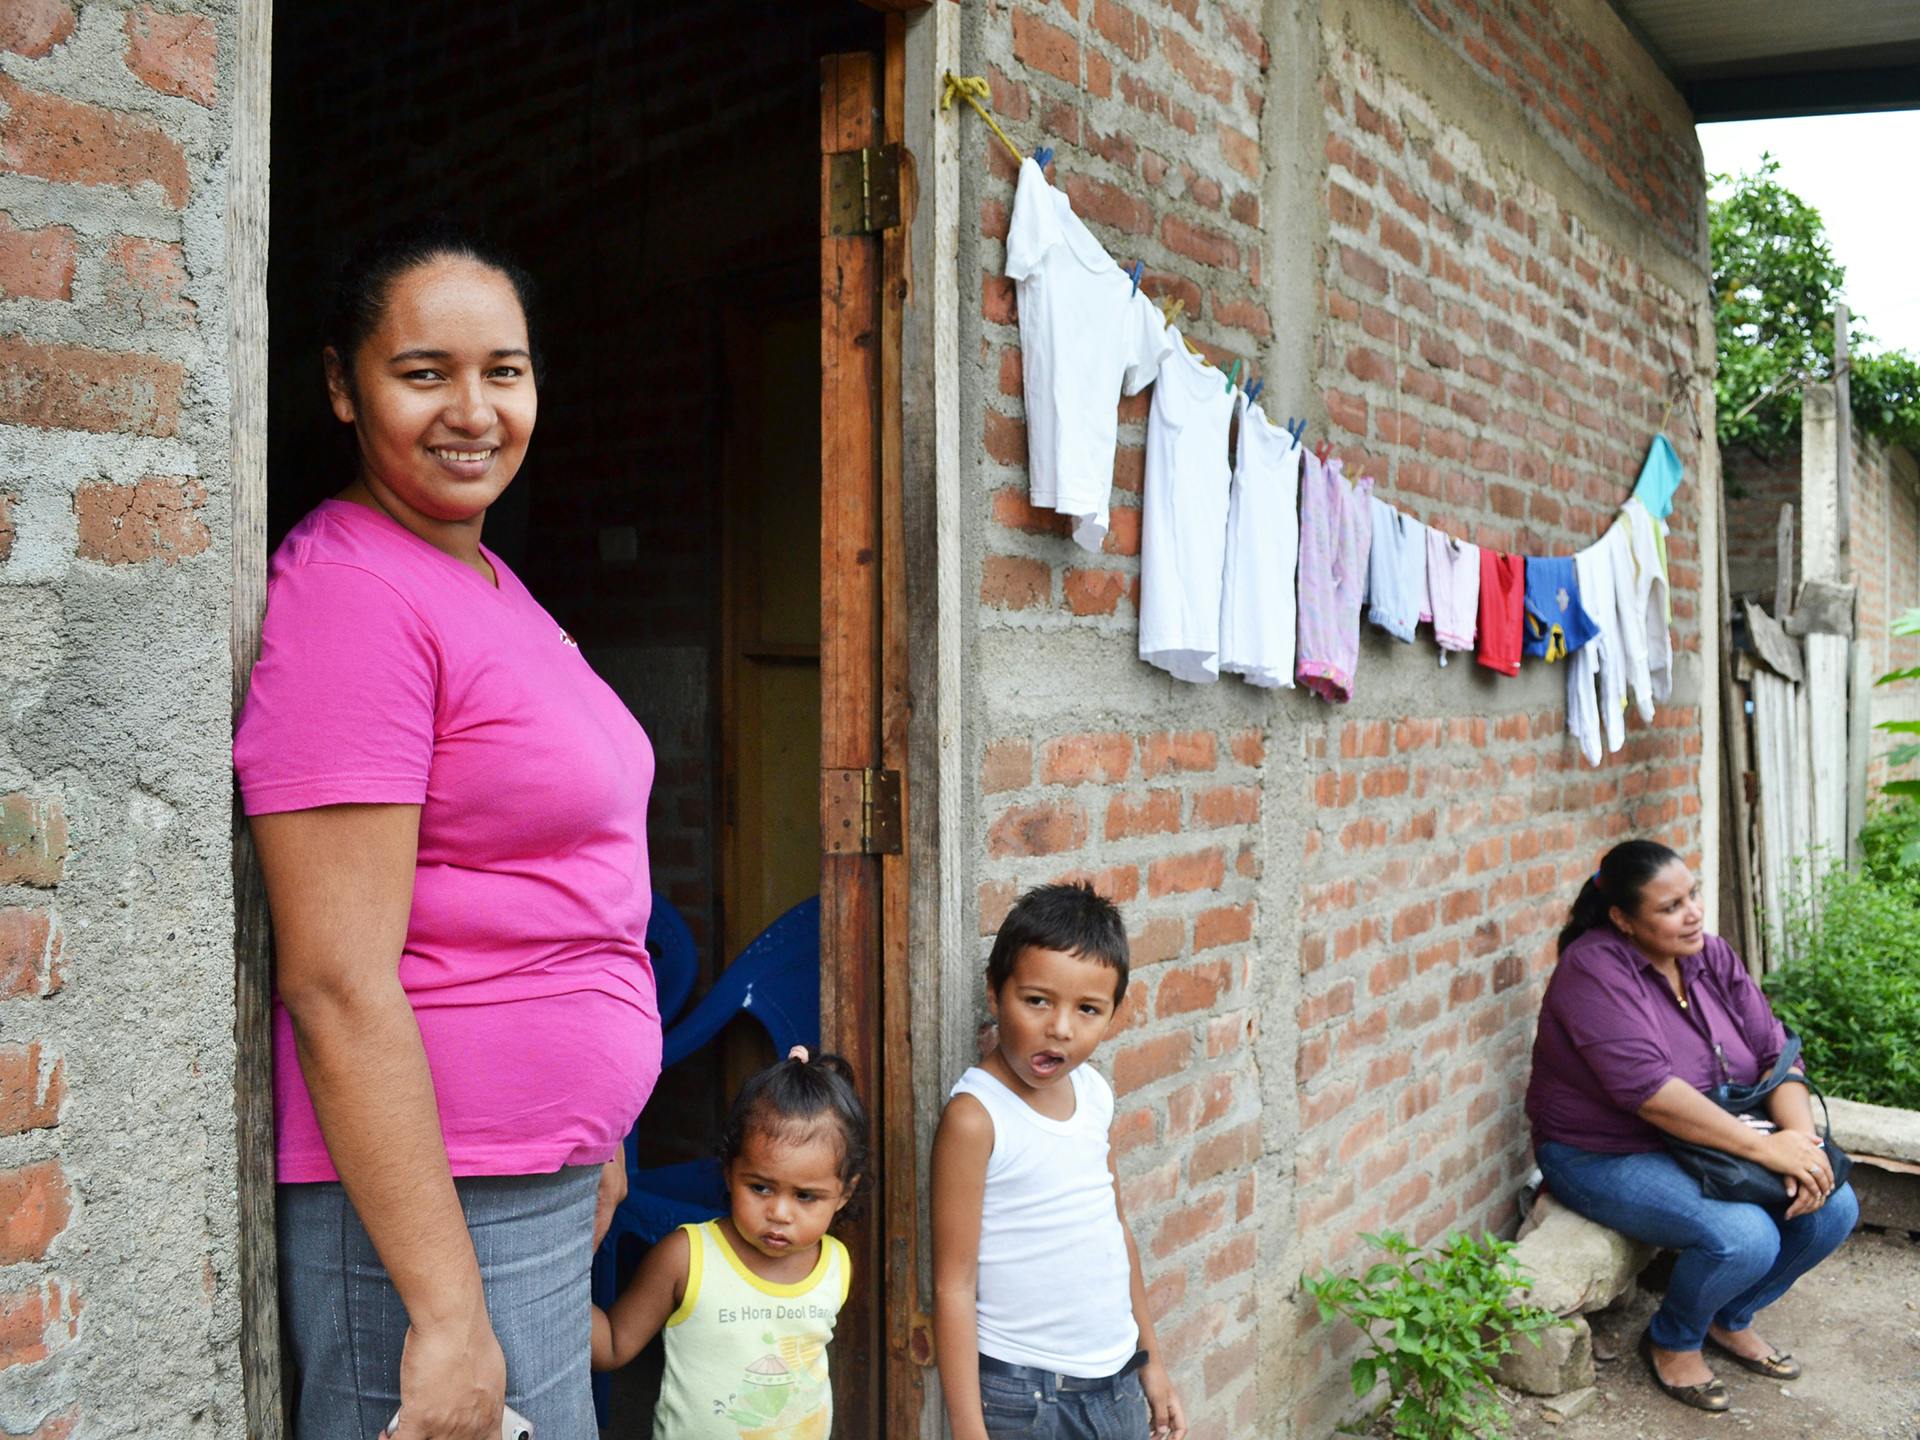 A Nicaraguan woman standing outside a house with two kids.